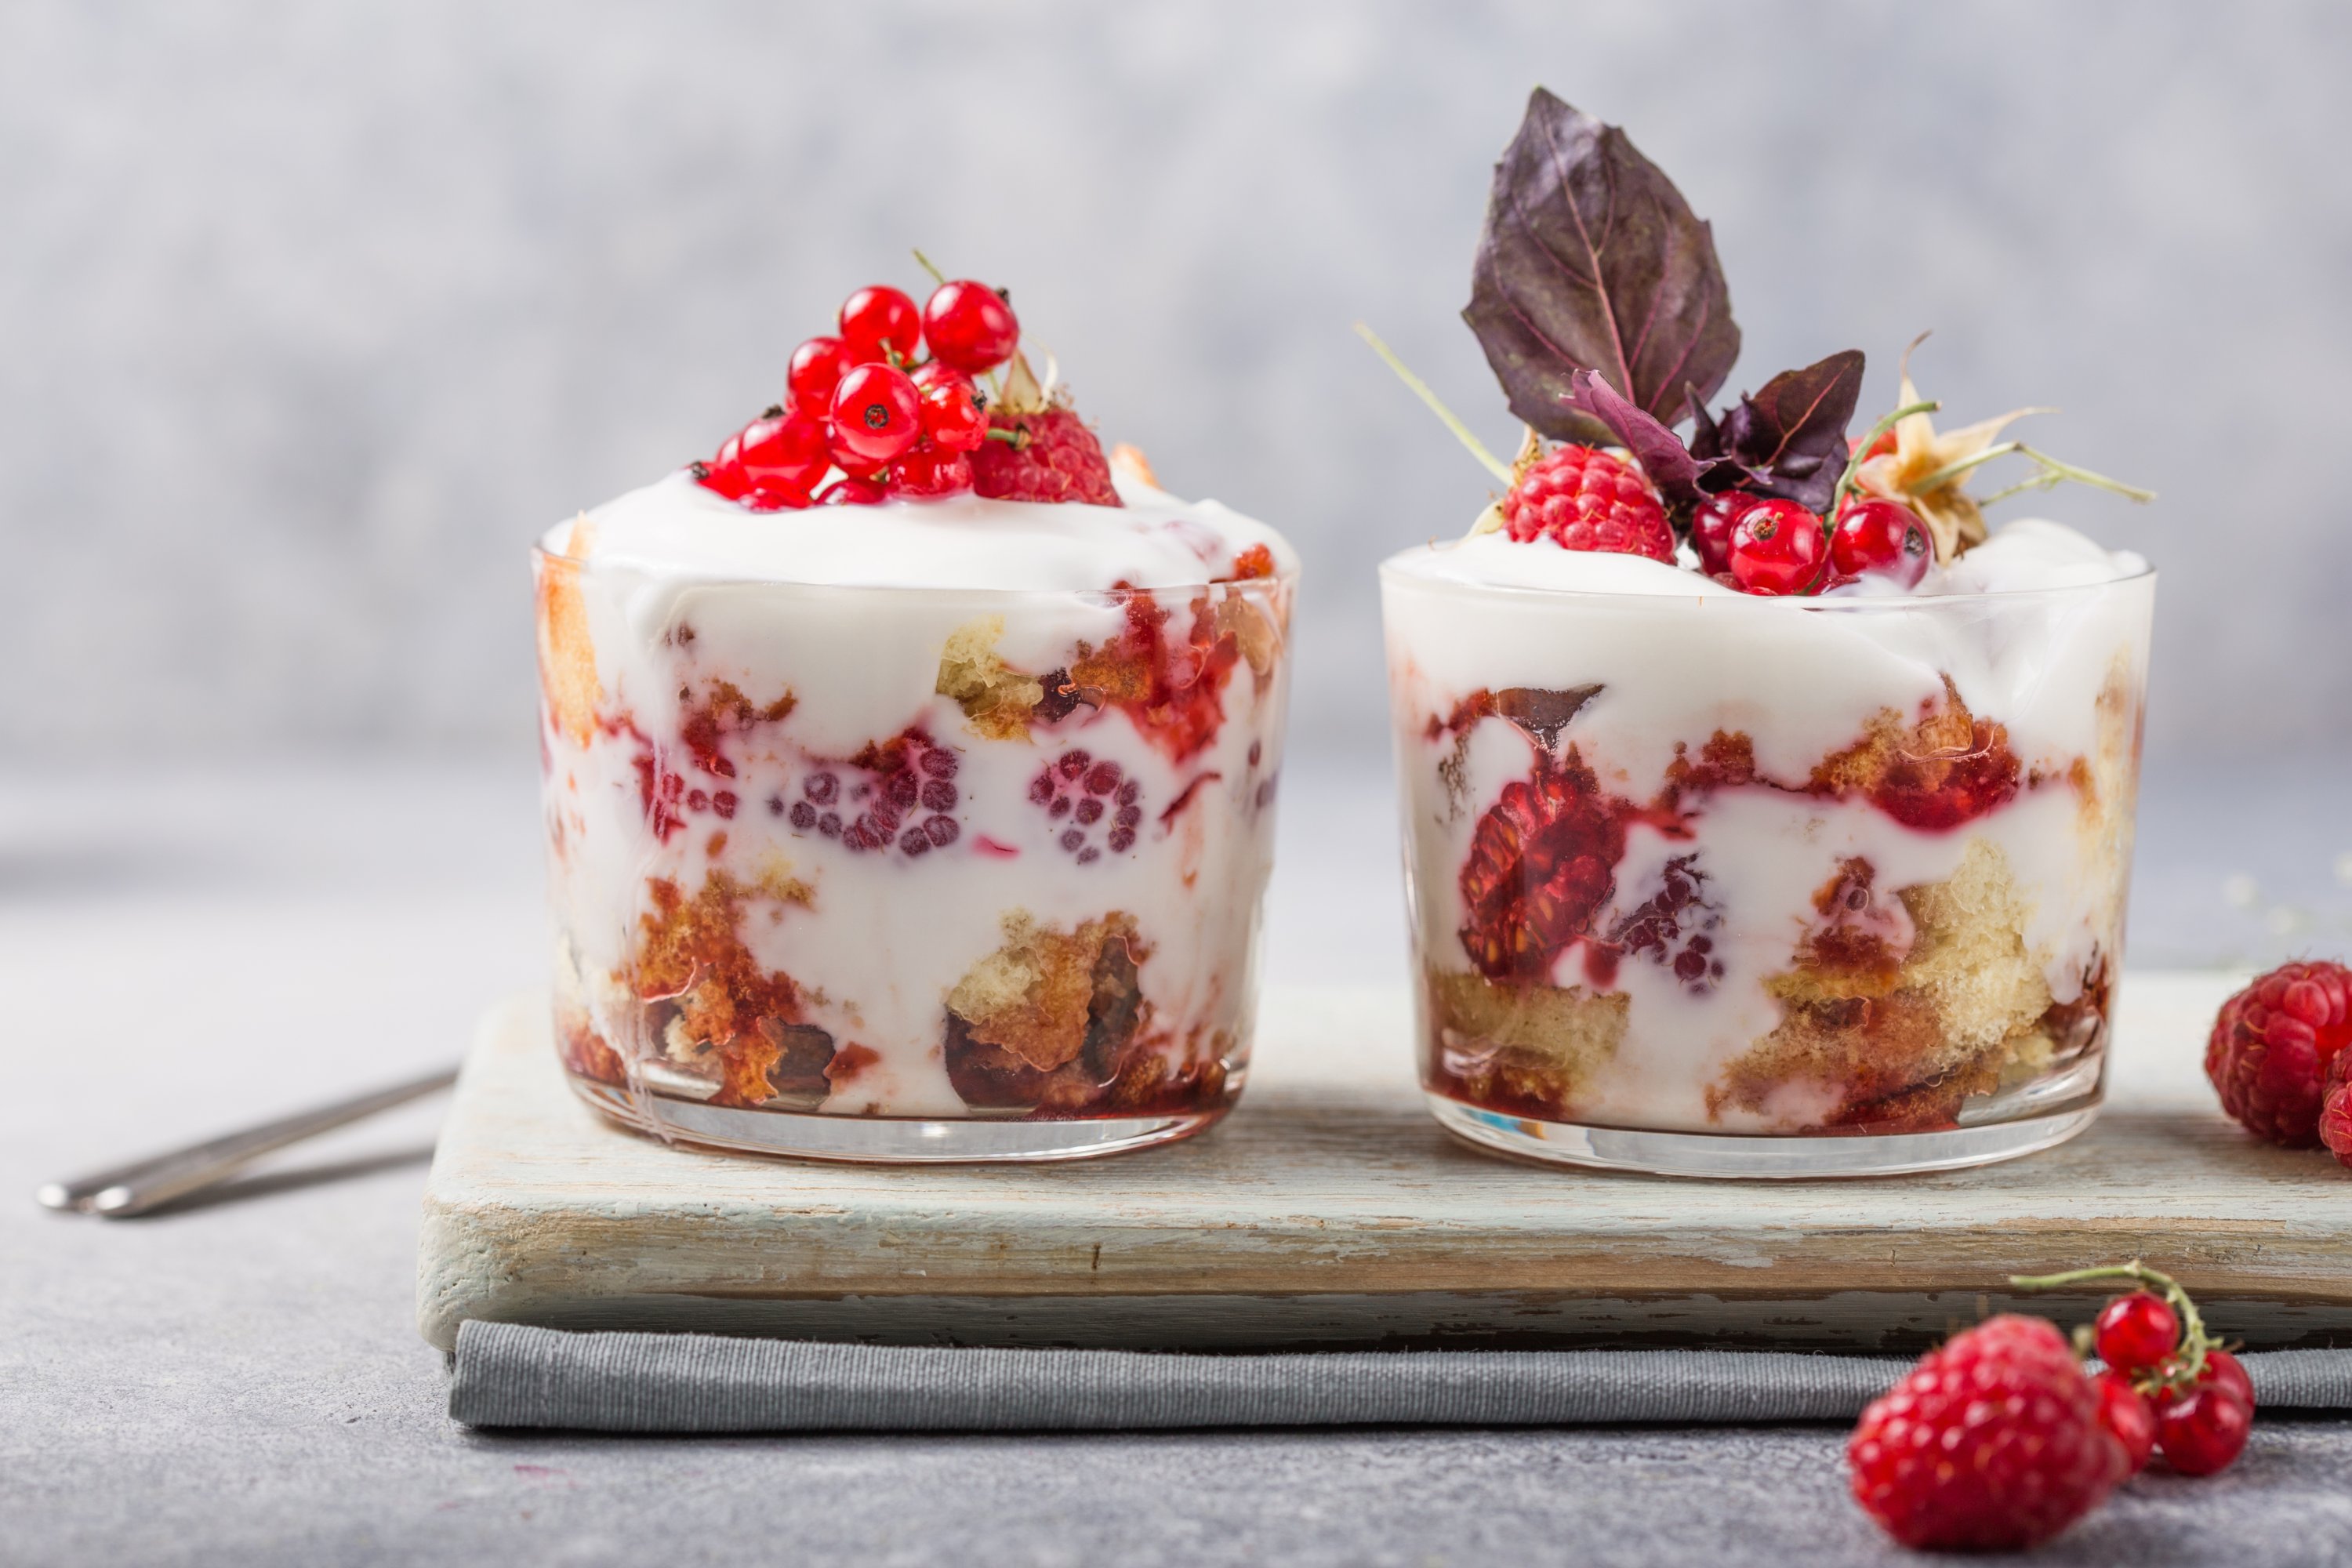 Layered trifle dessert with sponge cake, whipped cream and raspberries in serving glasses on a light background. (Shutterstock Photo)